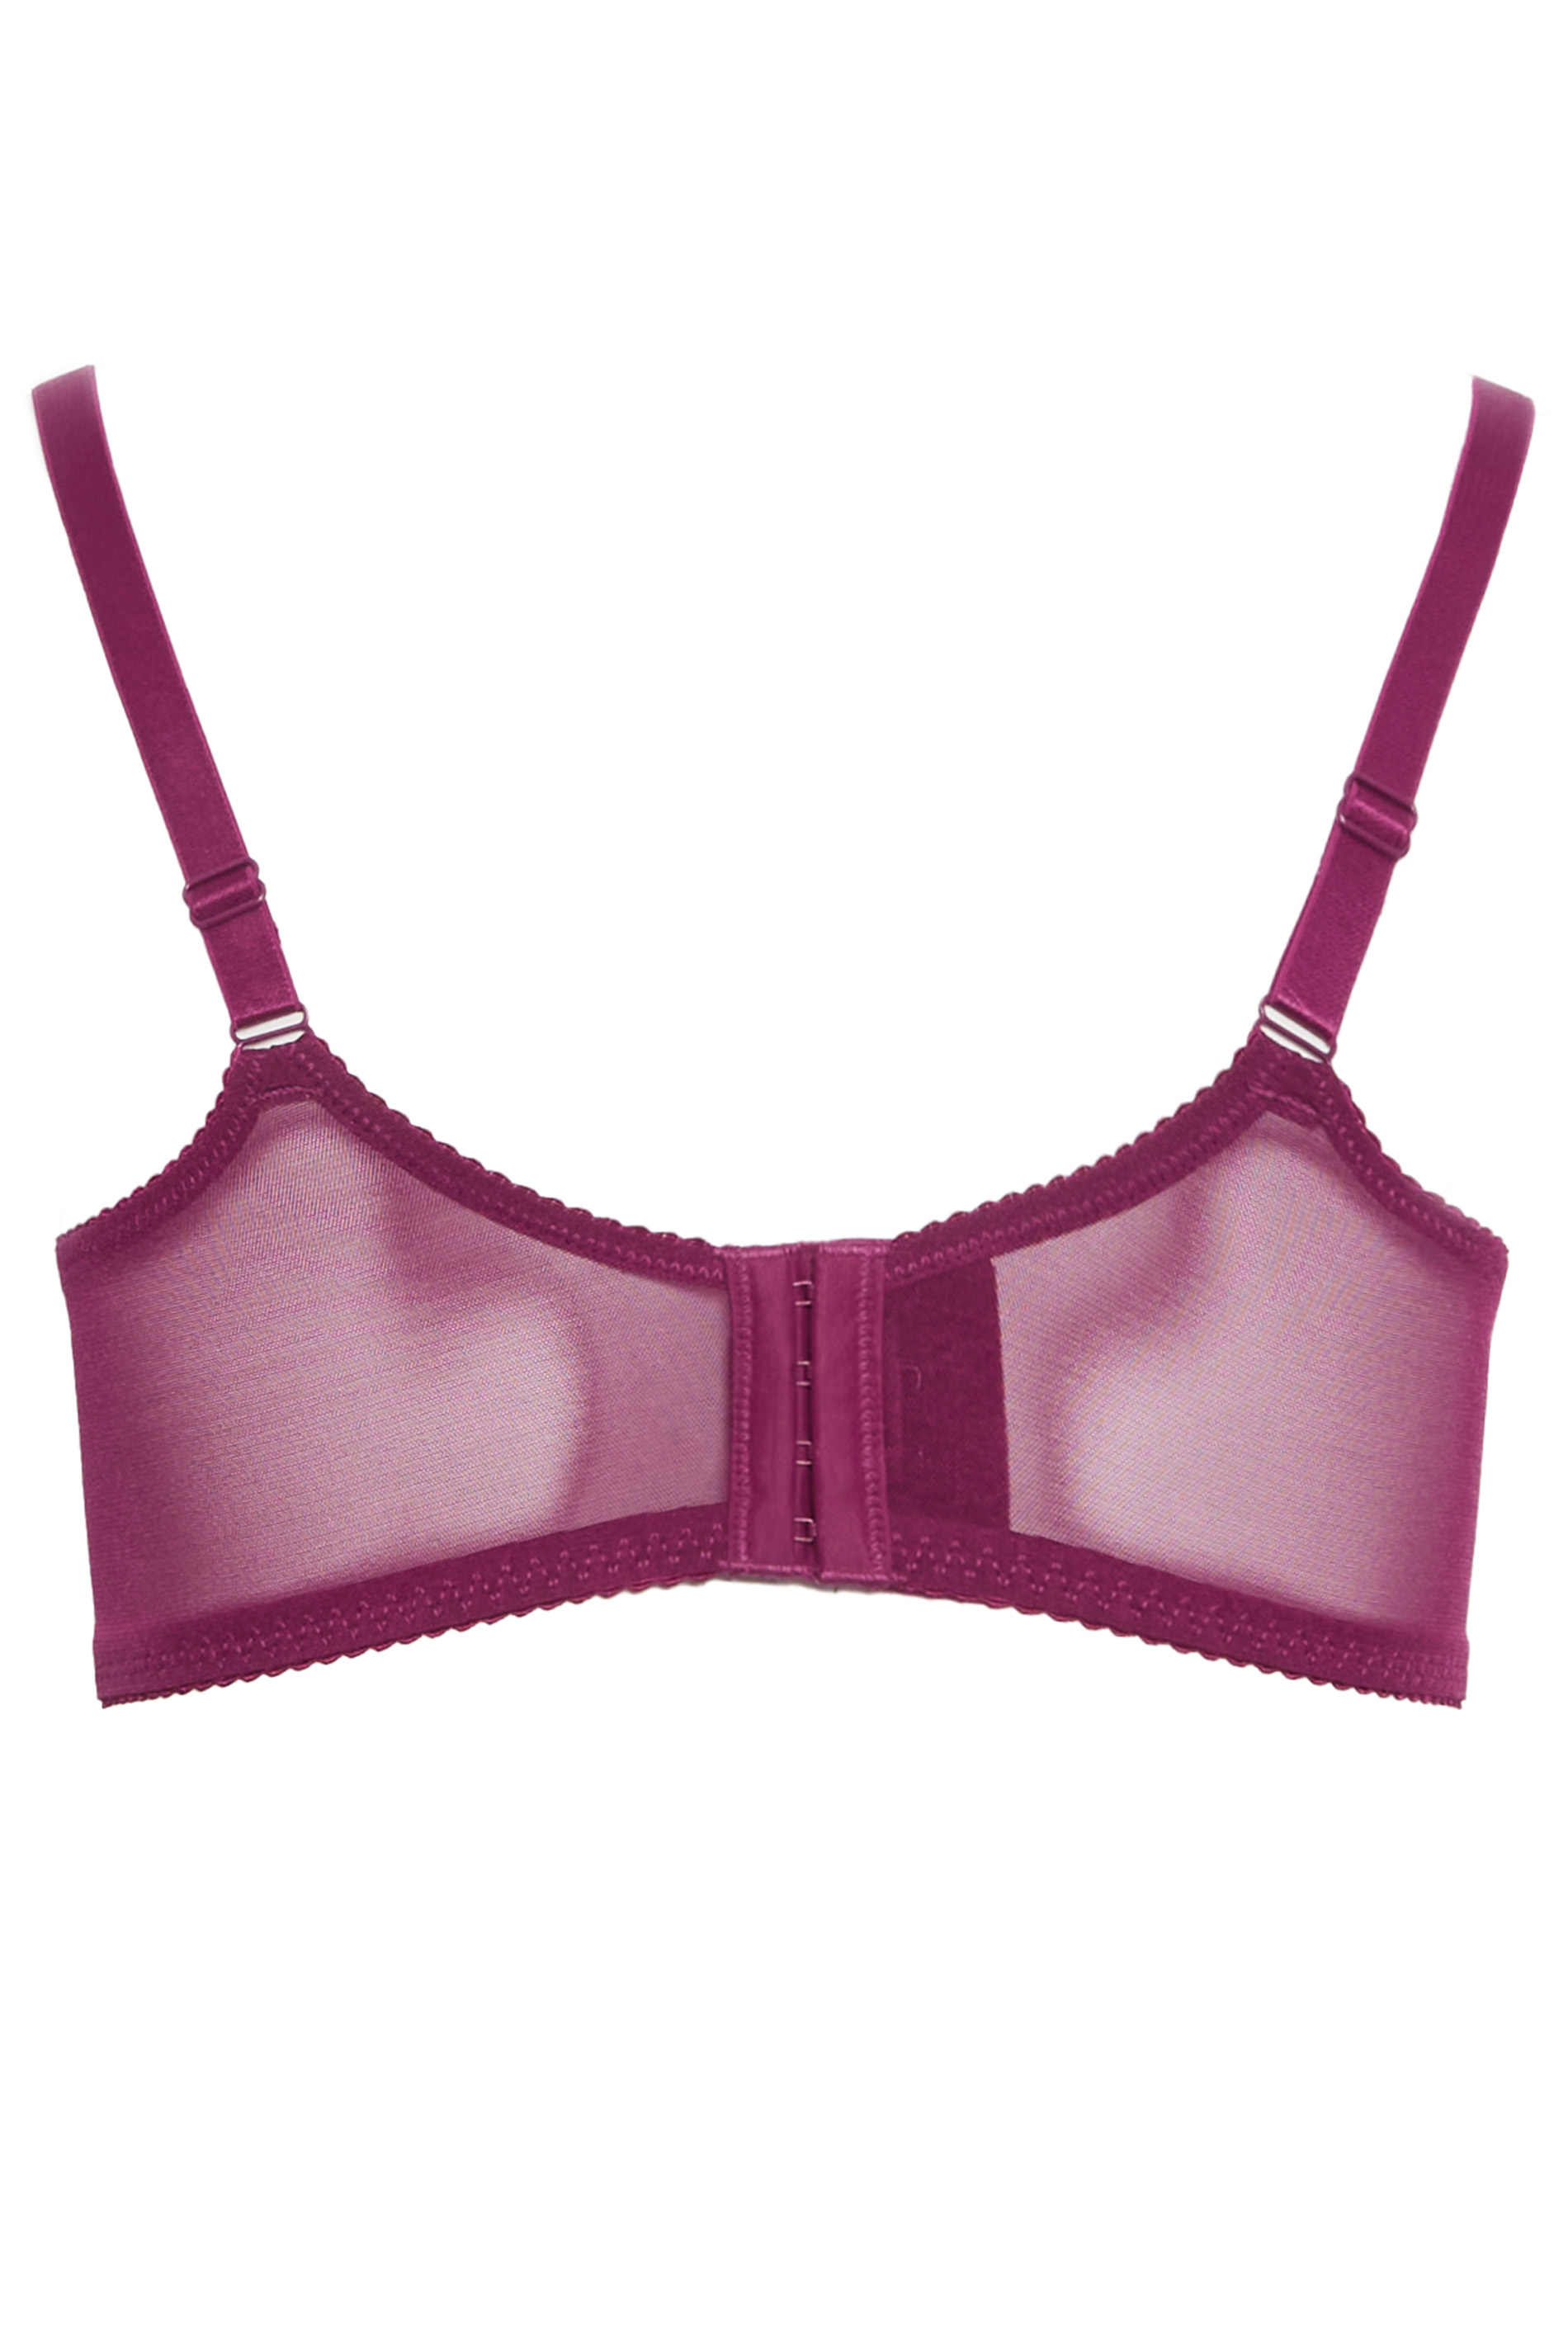 YOURS Burgundy Red Hi Shine Lace Non-Padded Non-Wired Full Cup Bra